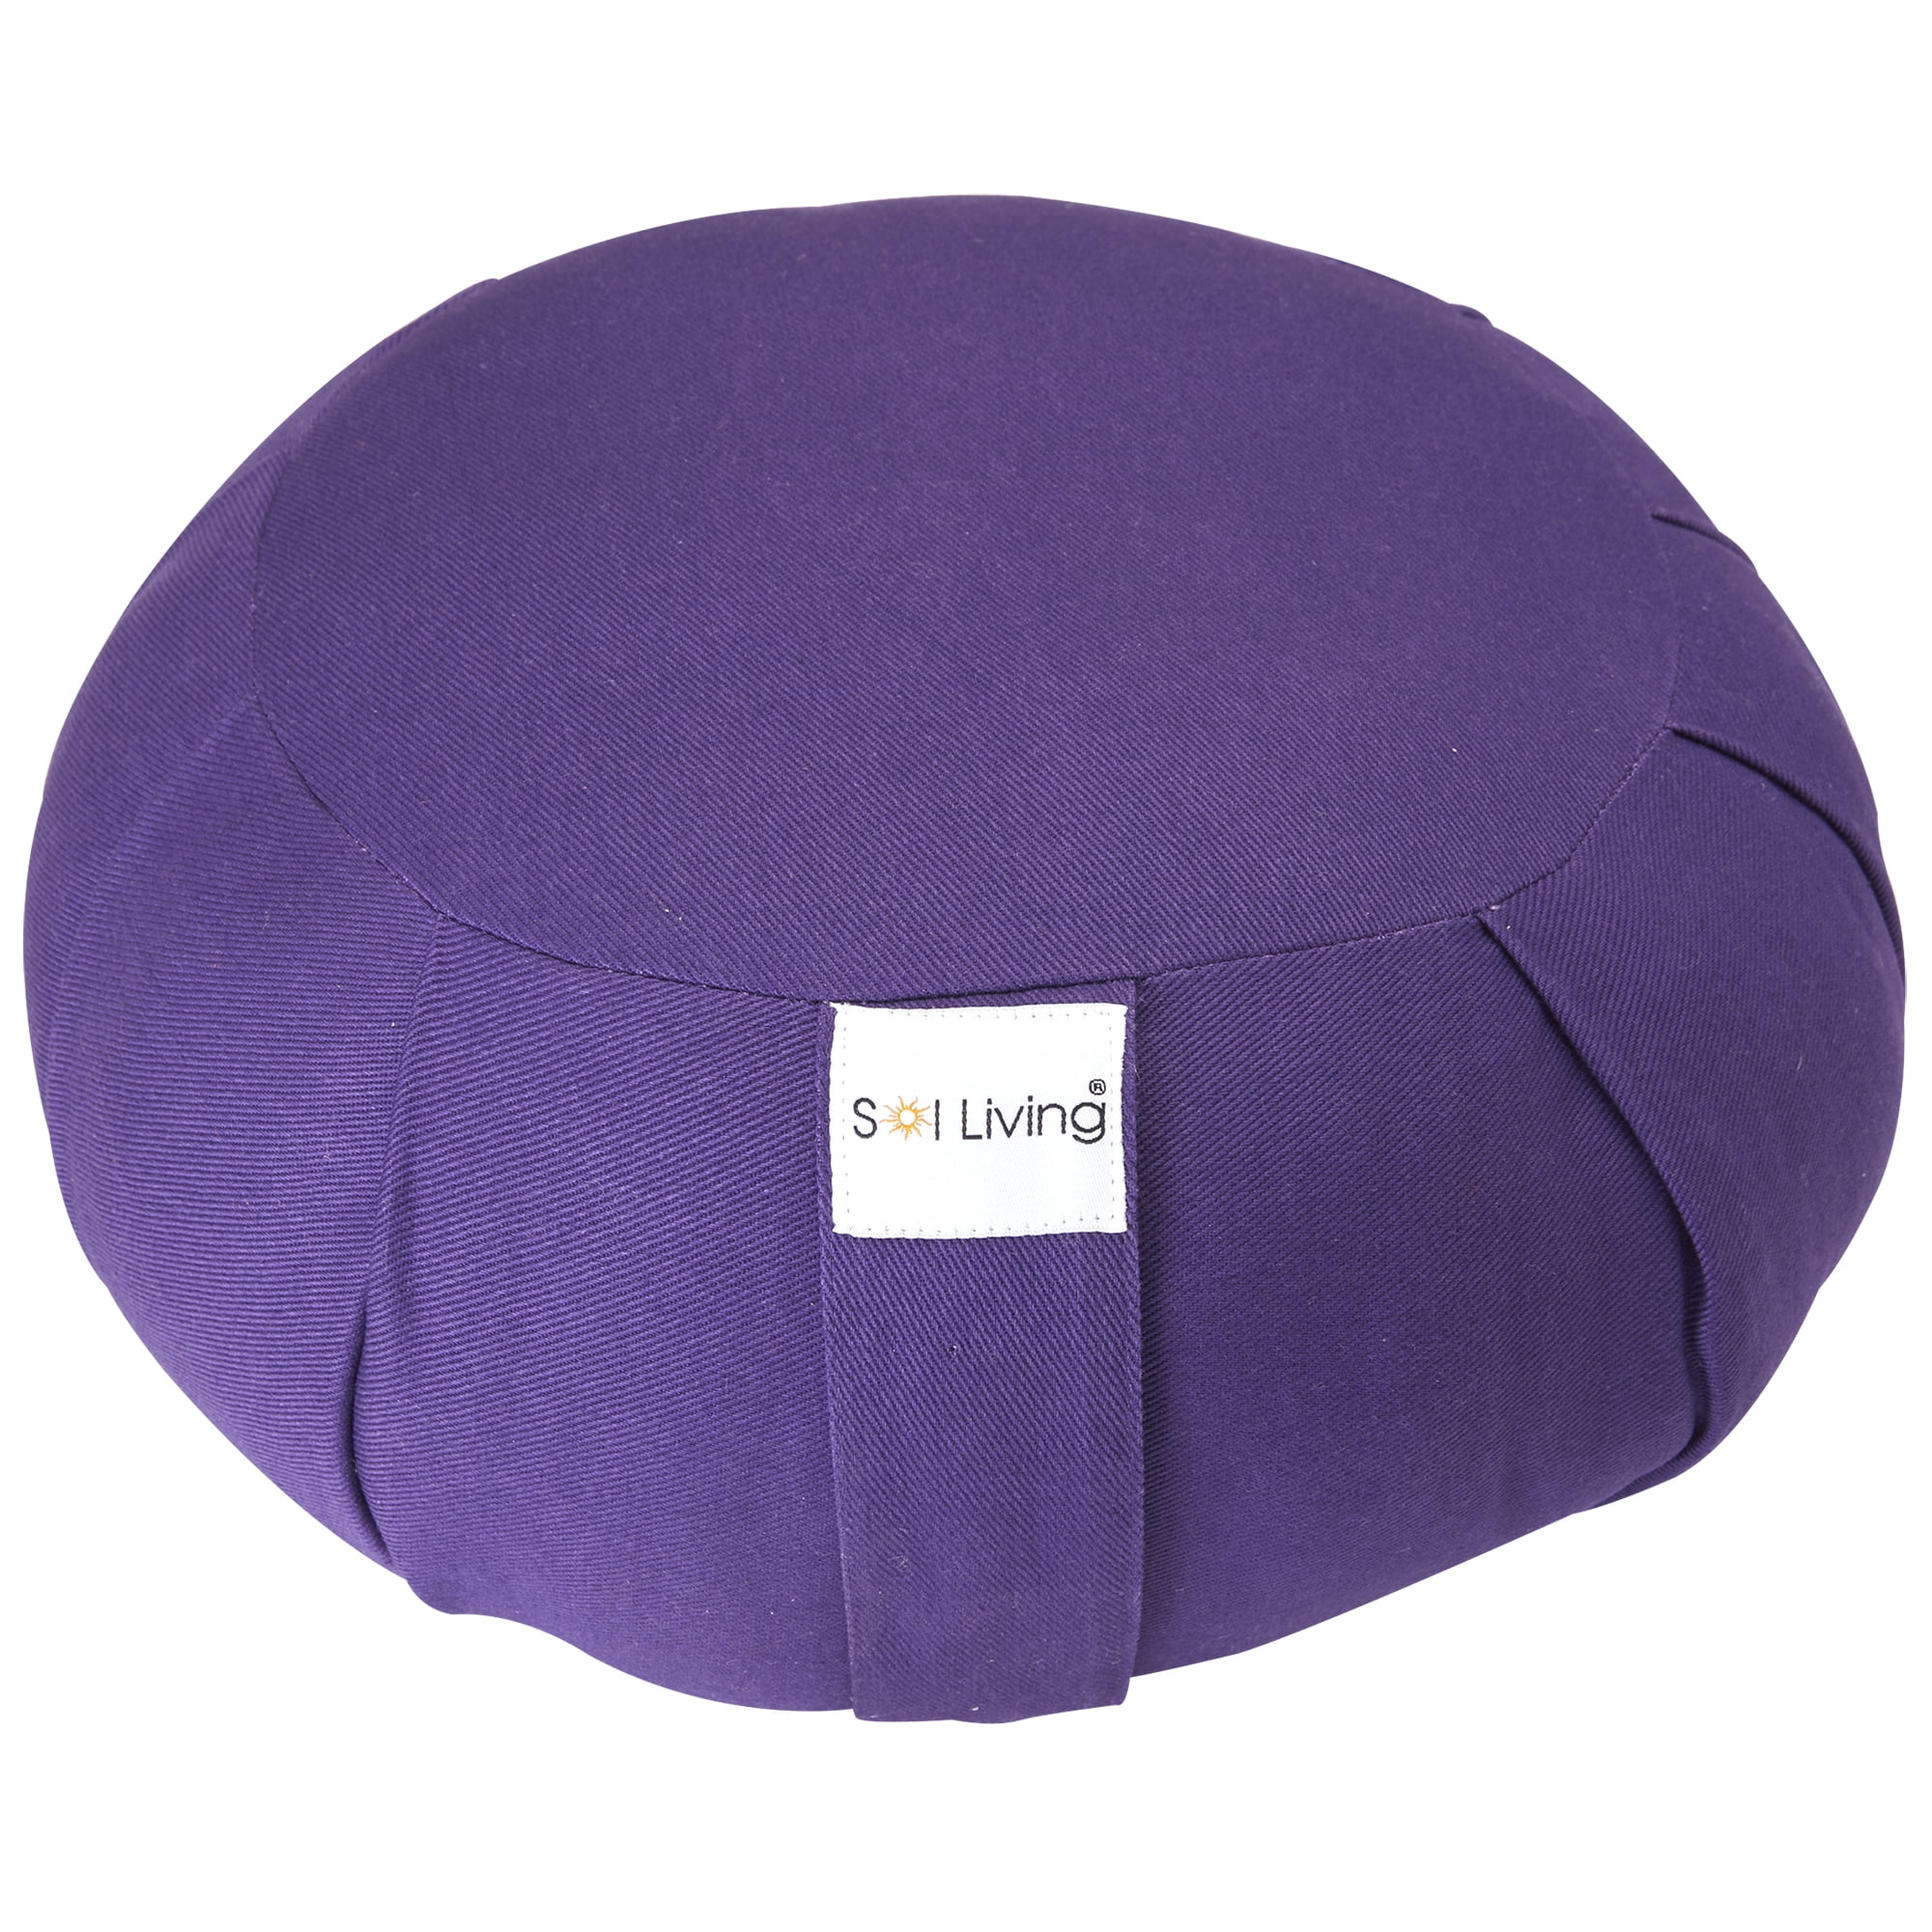 Stabilizes Back 28 x 10 x 10 Floor Pillow for Sitting & Lotus Pose Supports Posture Premium Cotton Sol Living Cylindrical Meditation Cushion 